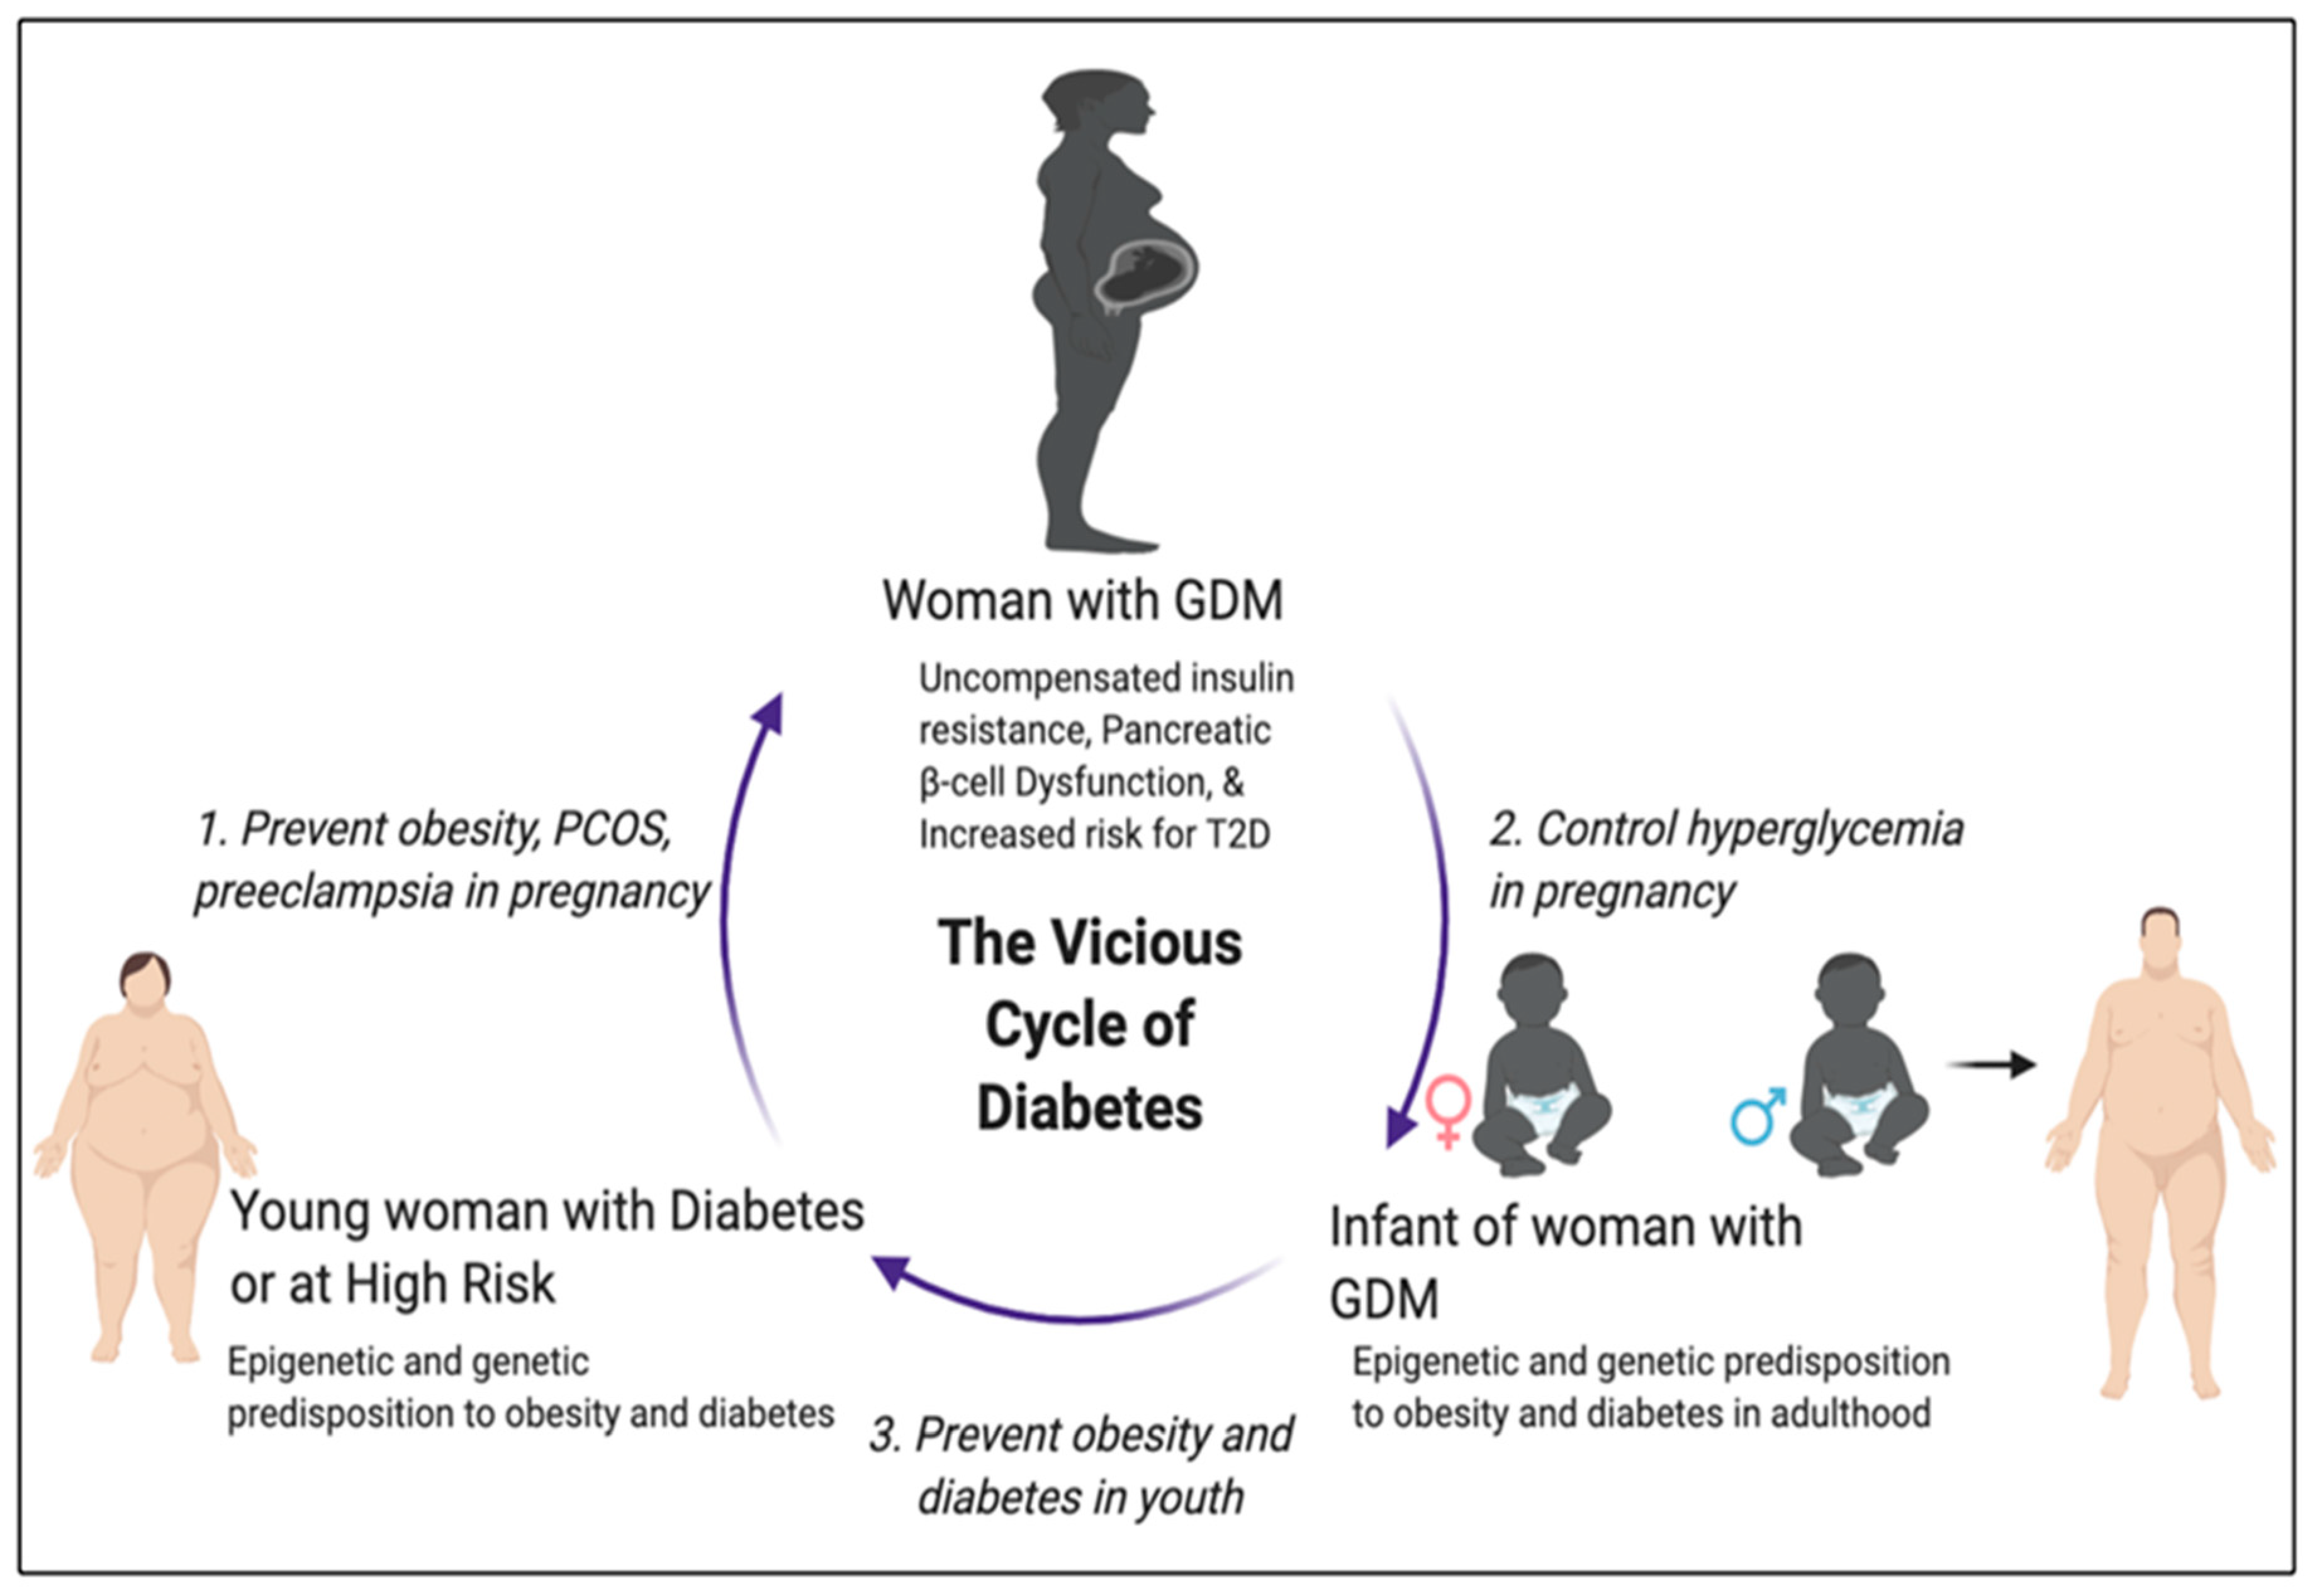 Chronic hyperglycemia during pregnancy